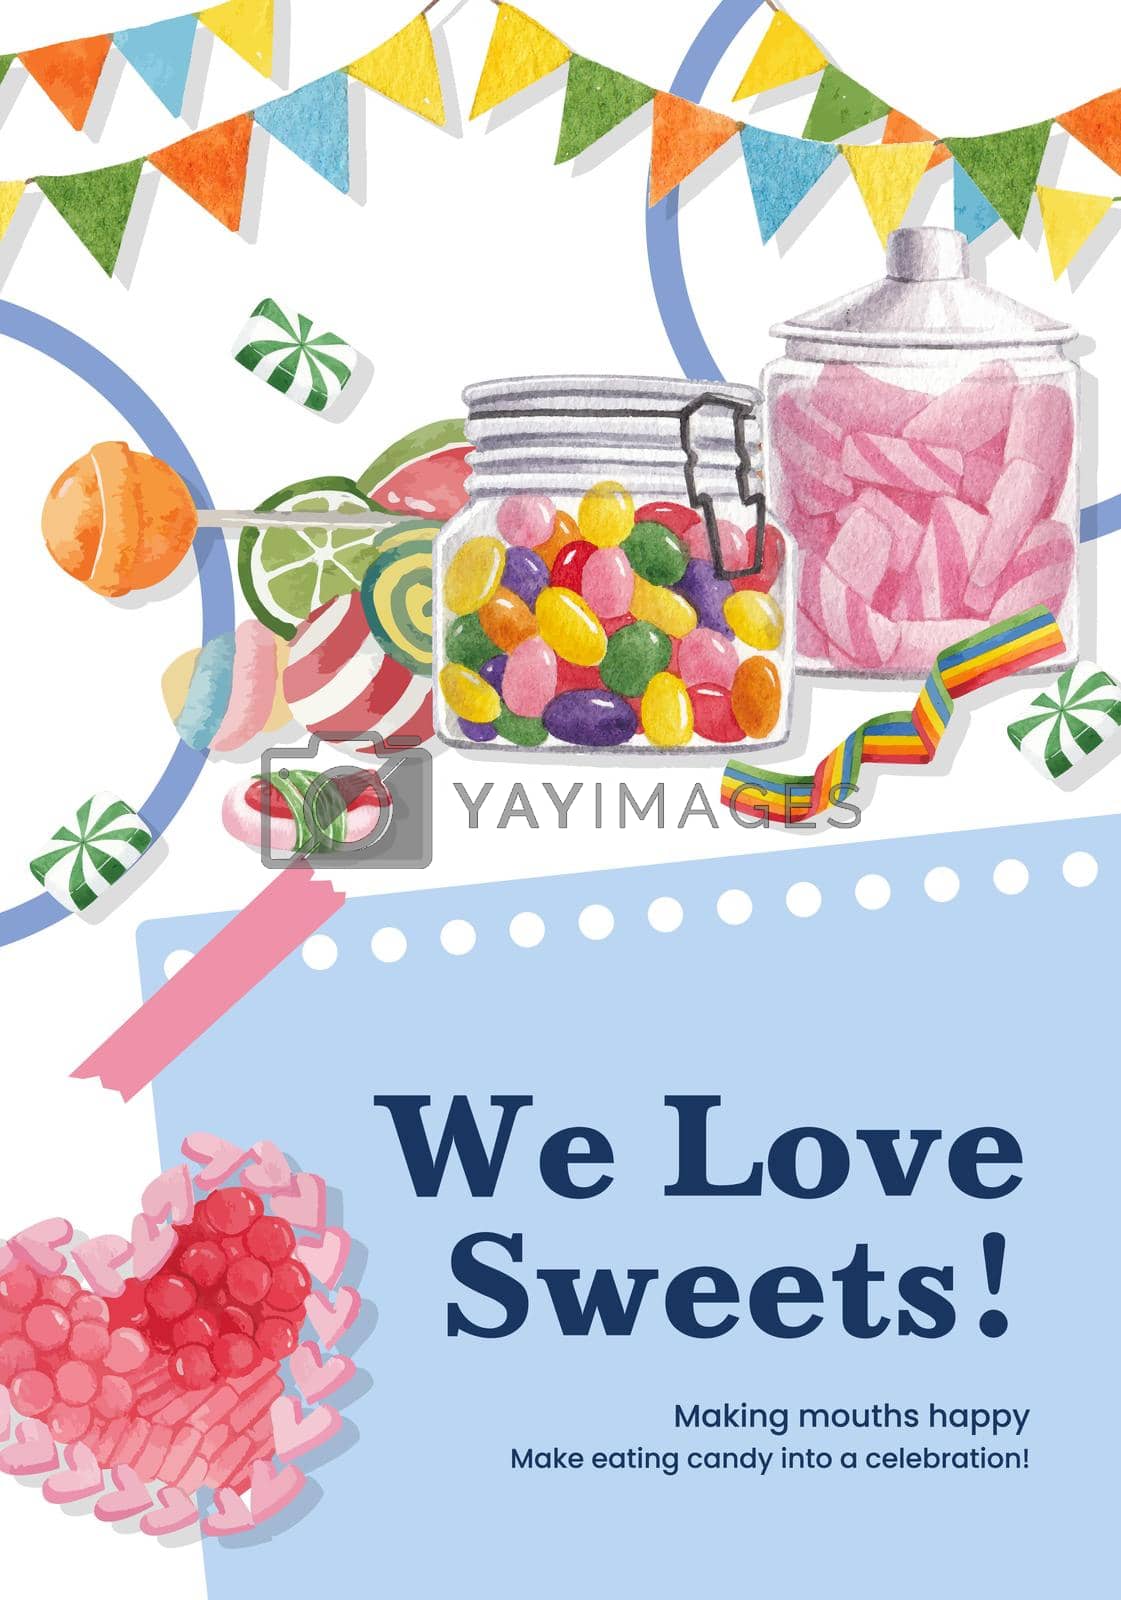 Royalty free image of Poster template with candy jelly party concept,watercolor style by Photographeeasia